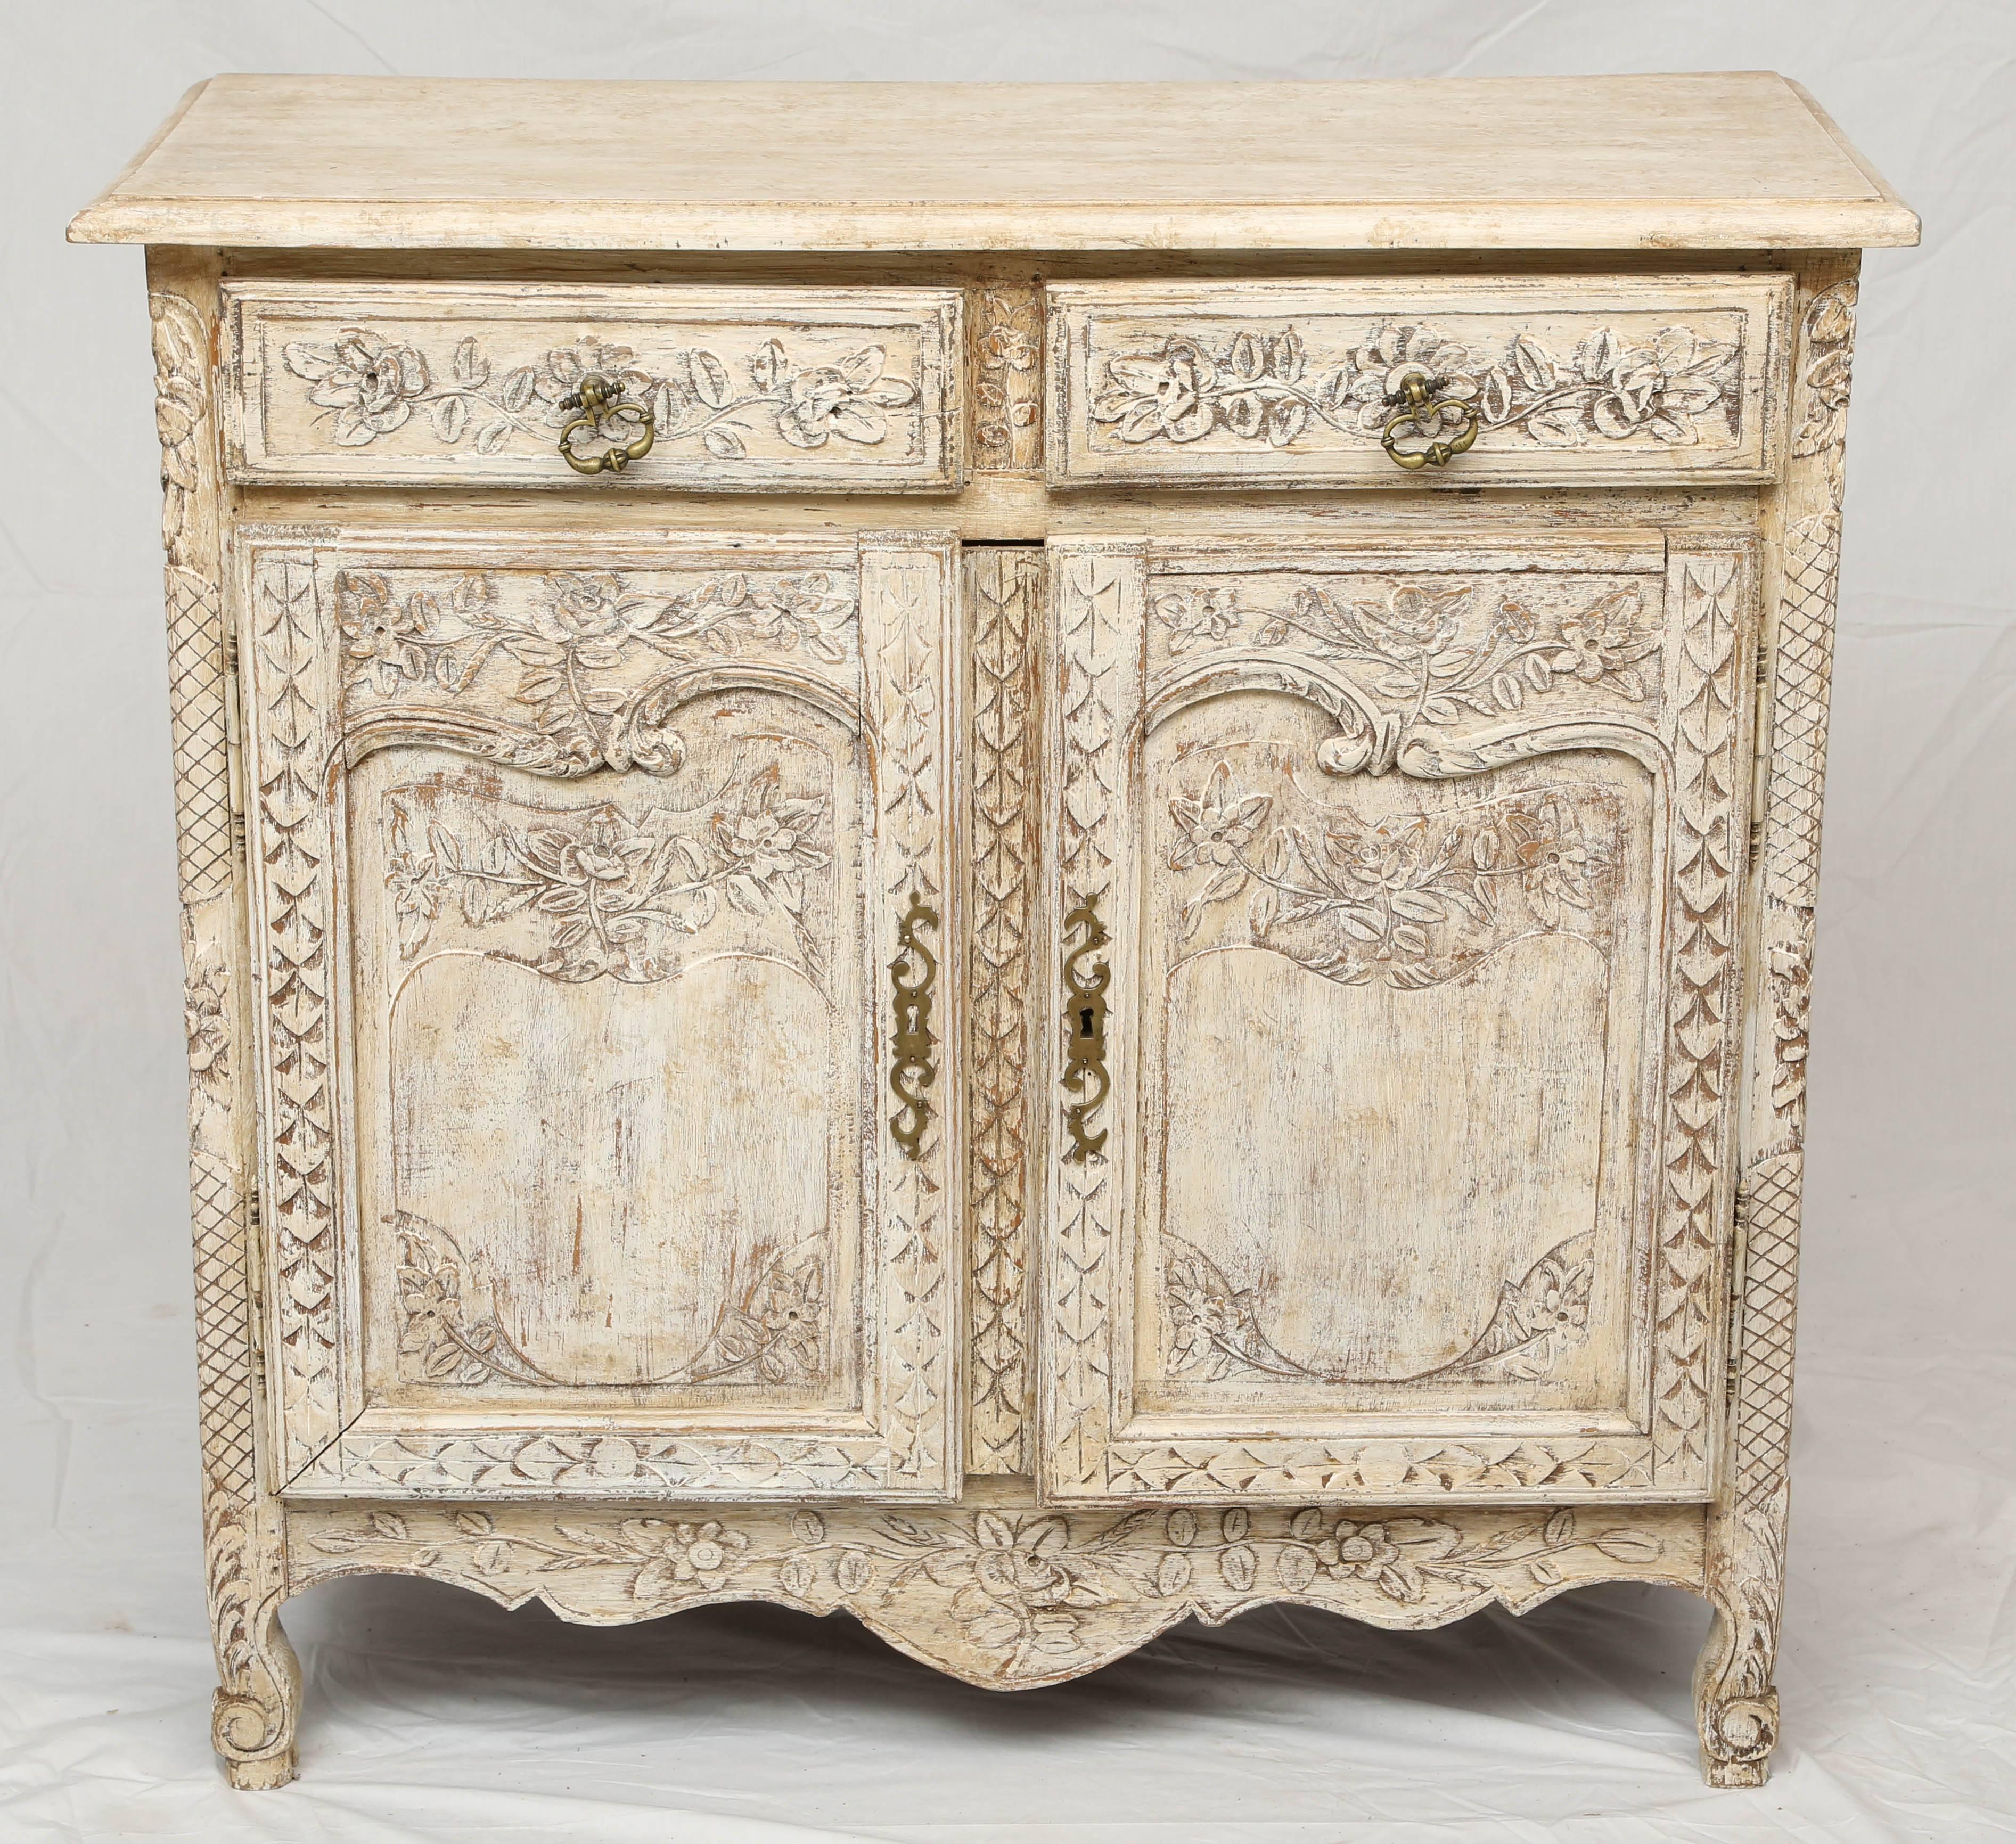 Enfilade, of oak, having a distressed painted finish, elaborately foliate carved case, its rectangular molded top, over double frieze drawers, with double cupboard doors, serpentine apron and raised on scrolling legs.

Stock ID: D9370